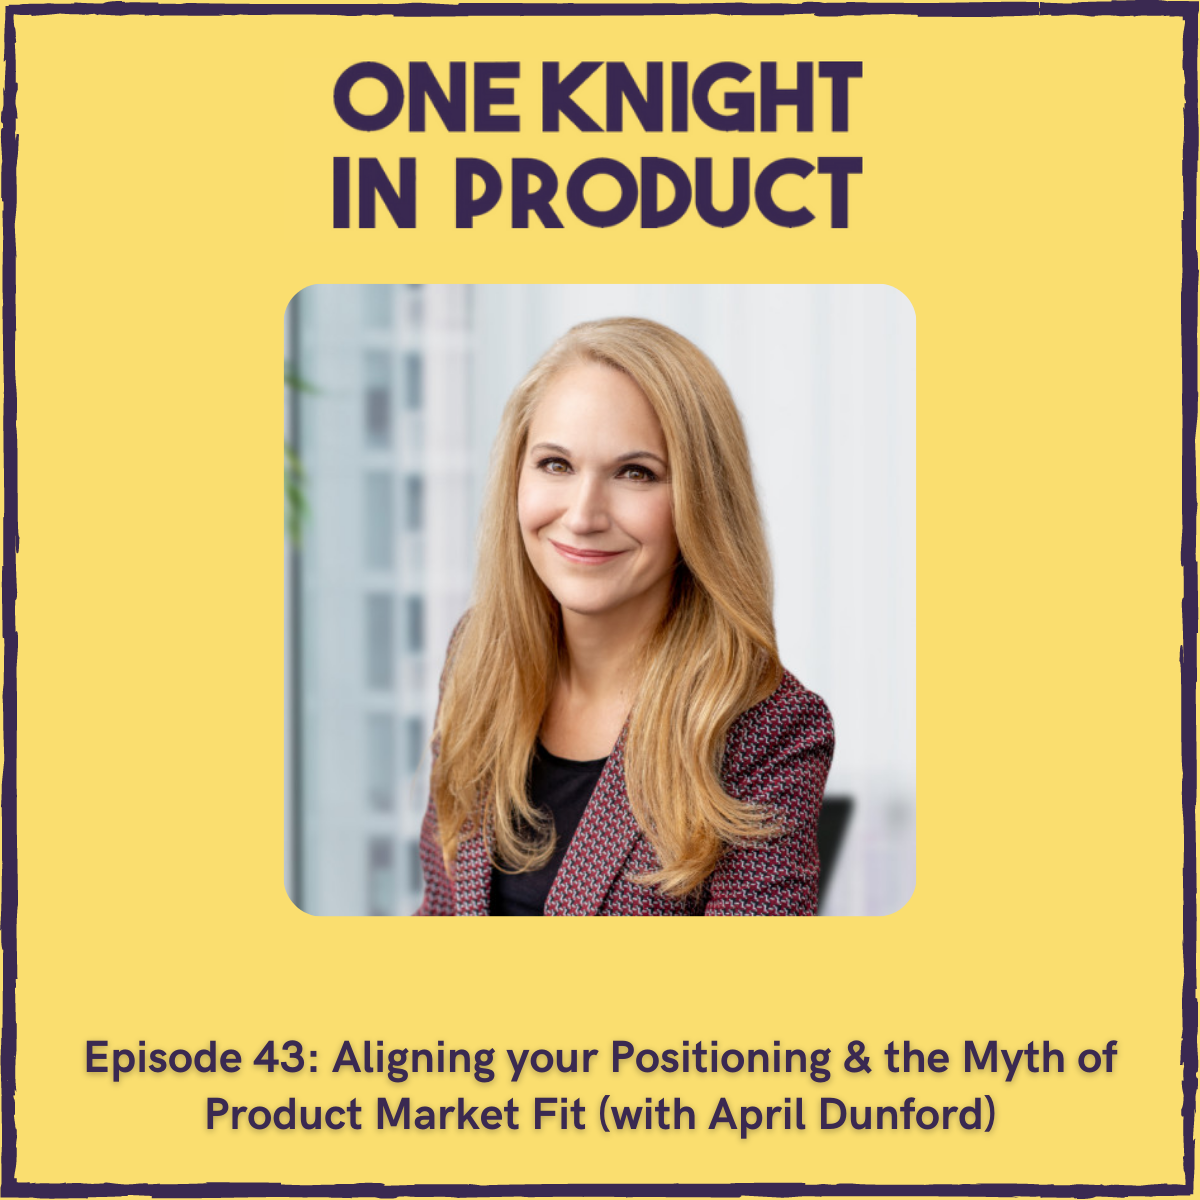 Aligning your Positioning & the Myth of Product Market Fit (with April Dunford, Positioning Consultant & Author "Obviously Awesome")